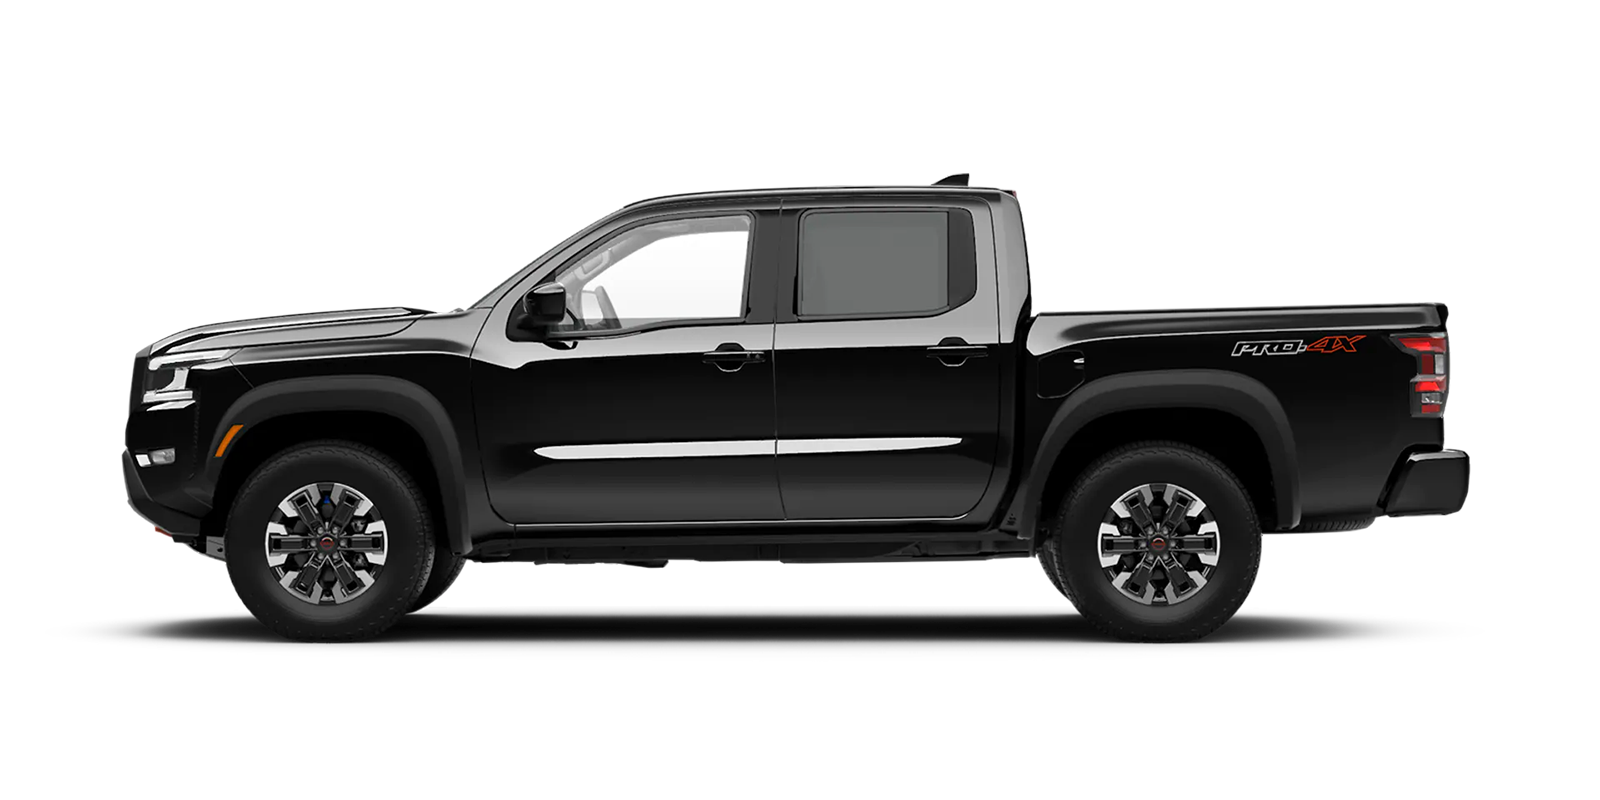 2022 Frontier Crew Cab Pro-4X 4x4 in Super Black | Nissan of Pittsfield in Pittsfield MA